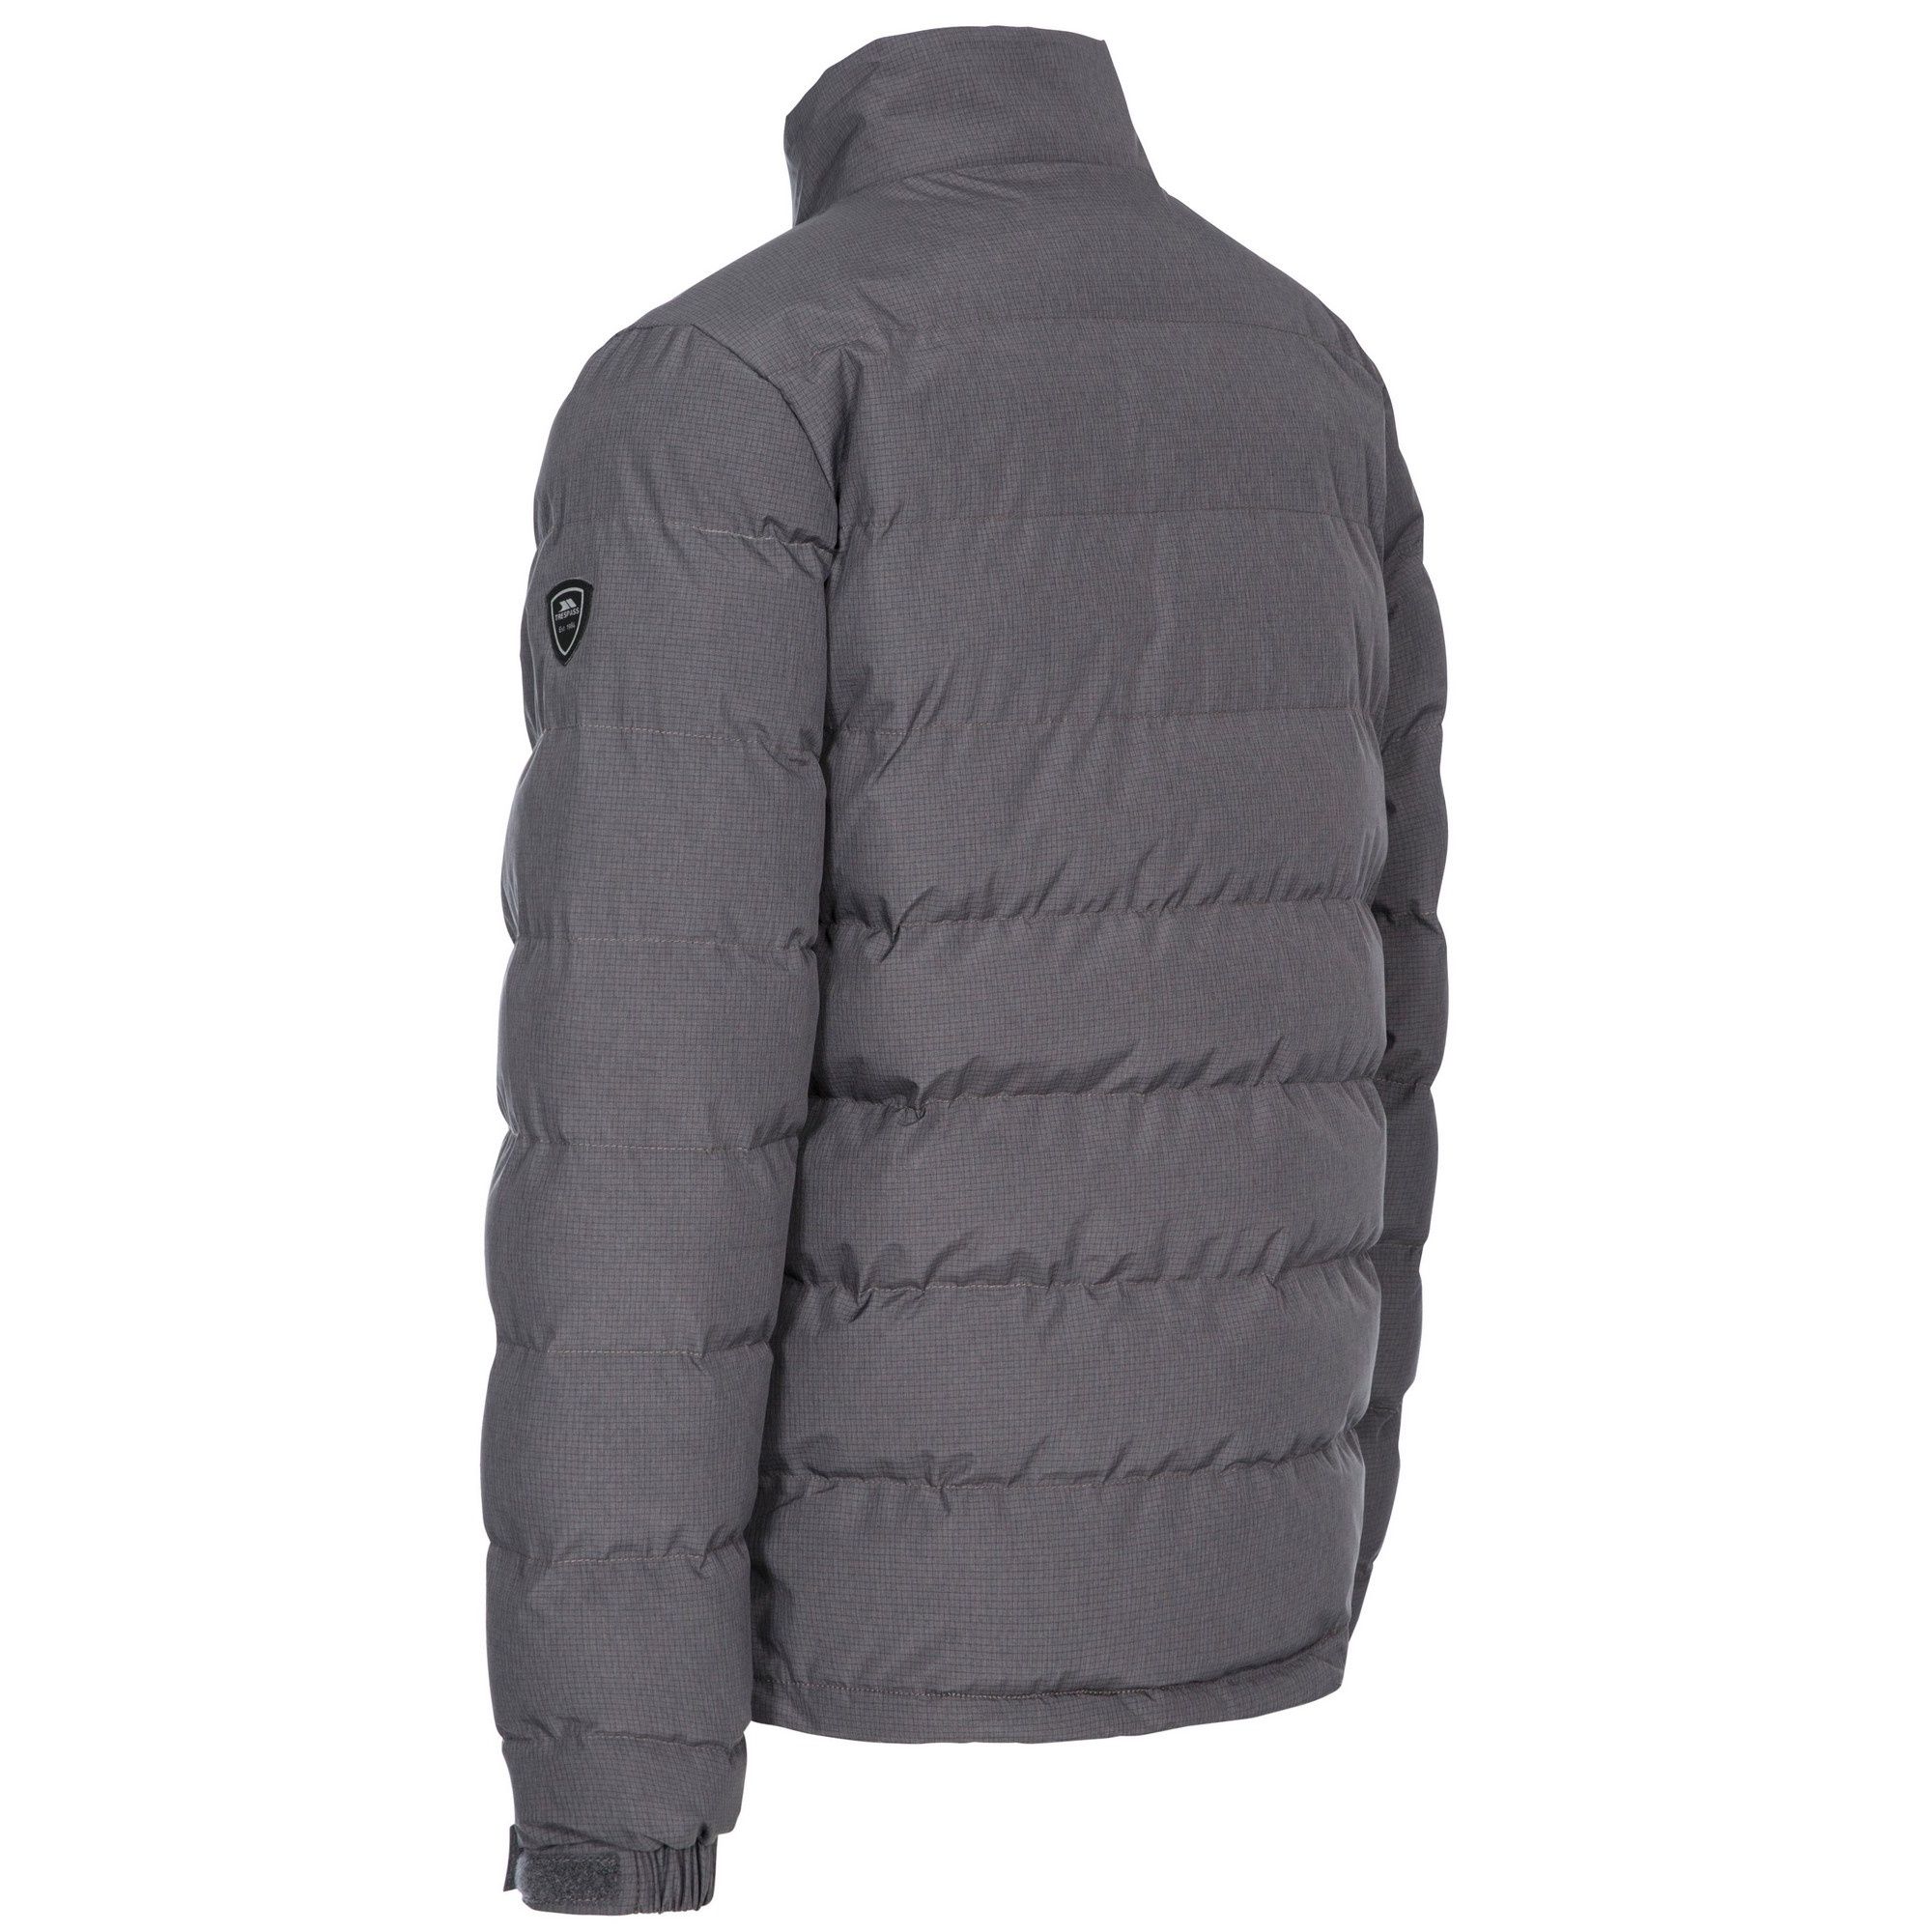 Padded. Marled fabric. 3 zip pockets. Gunmetal trims. Adjustable drawcord hem. Inner storm flap. Badge detail on sleeve. Waterproof 5000mm, windproof. Shell: 100% Polyester, TPU membrane, Lining: 100% Polyester, Filling: 100% Polyester. Trespass Mens Chest Sizing (approx): S - 35-37in/89-94cm, M - 38-40in/96.5-101.5cm, L - 41-43in/104-109cm, XL - 44-46in/111.5-117cm, XXL - 46-48in/117-122cm, 3XL - 48-50in/122-127cm.